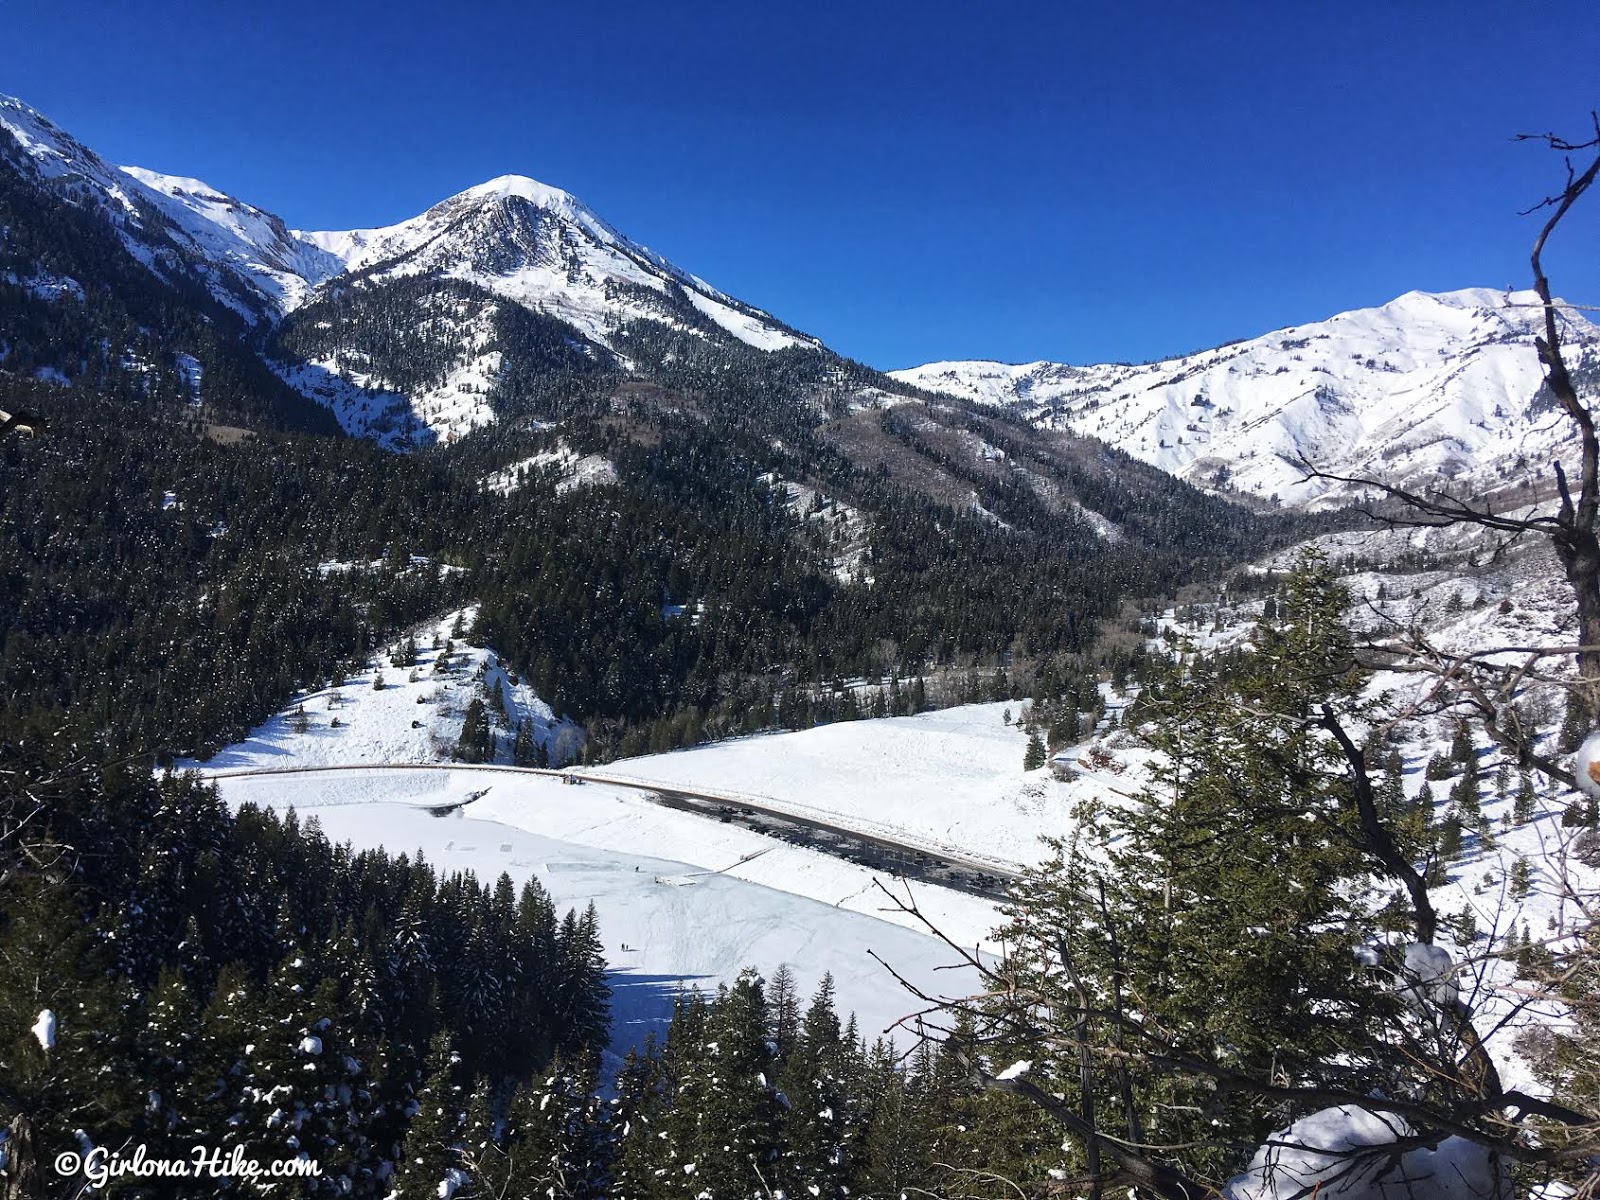 Hiking the Tibble Fork Loop Trail, American Fork Canyon